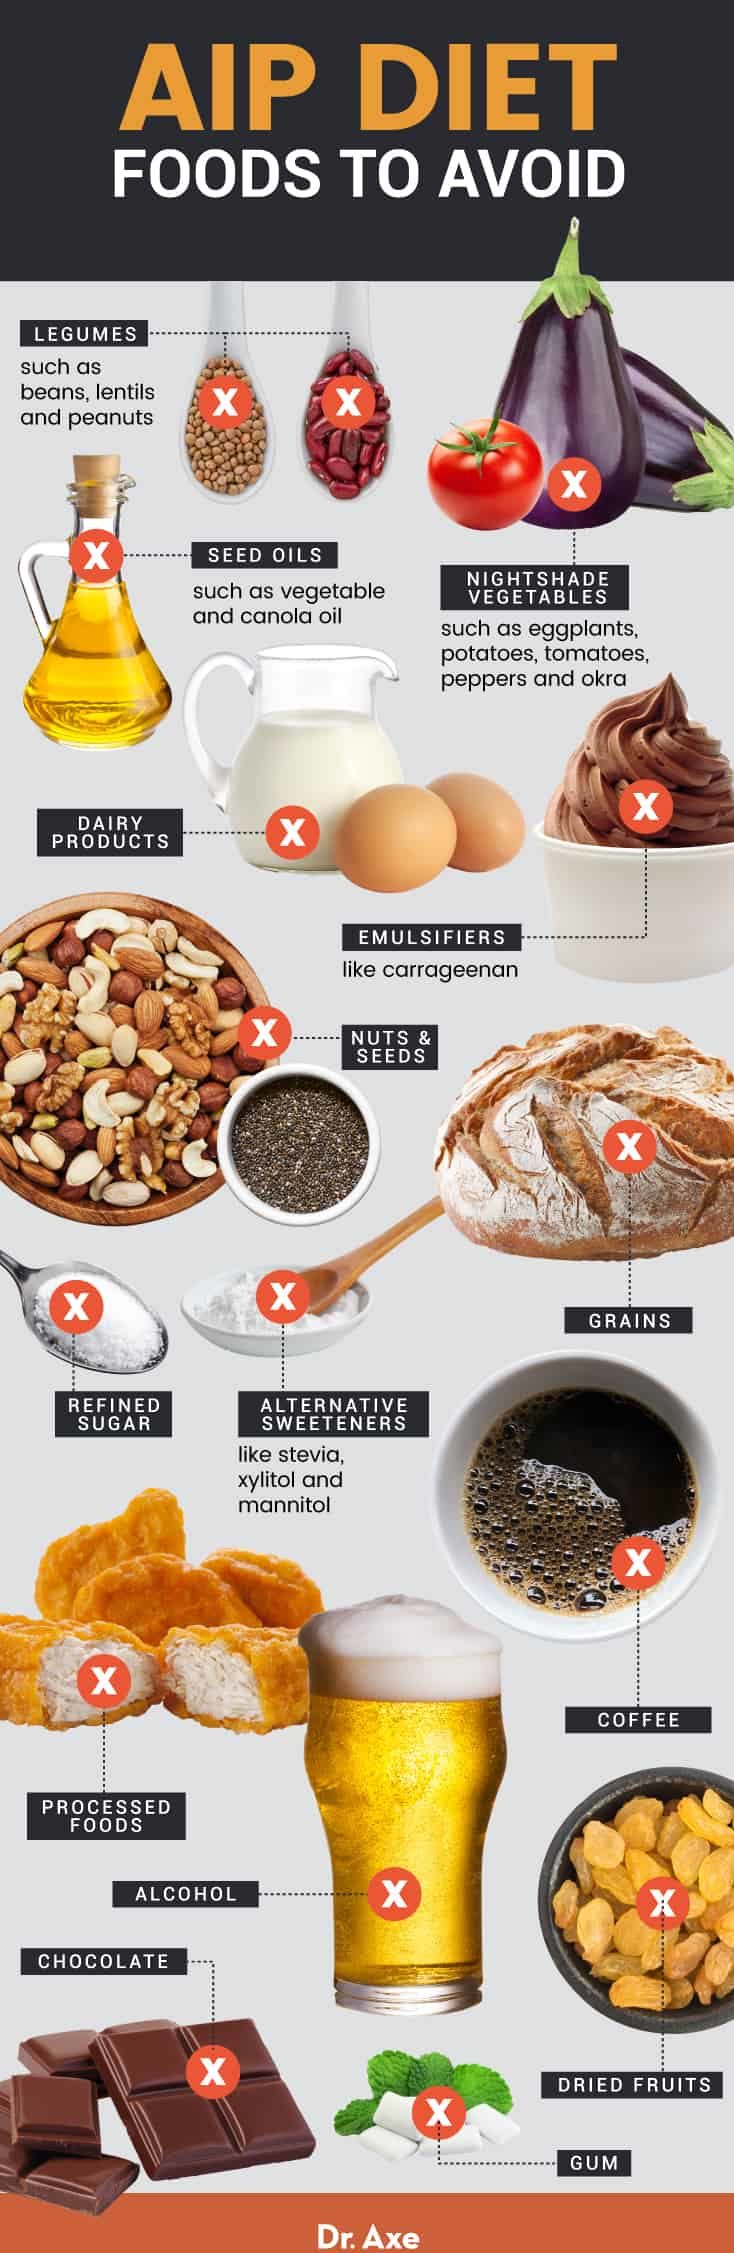 AIP diet foods to avoid - Dr. Axe